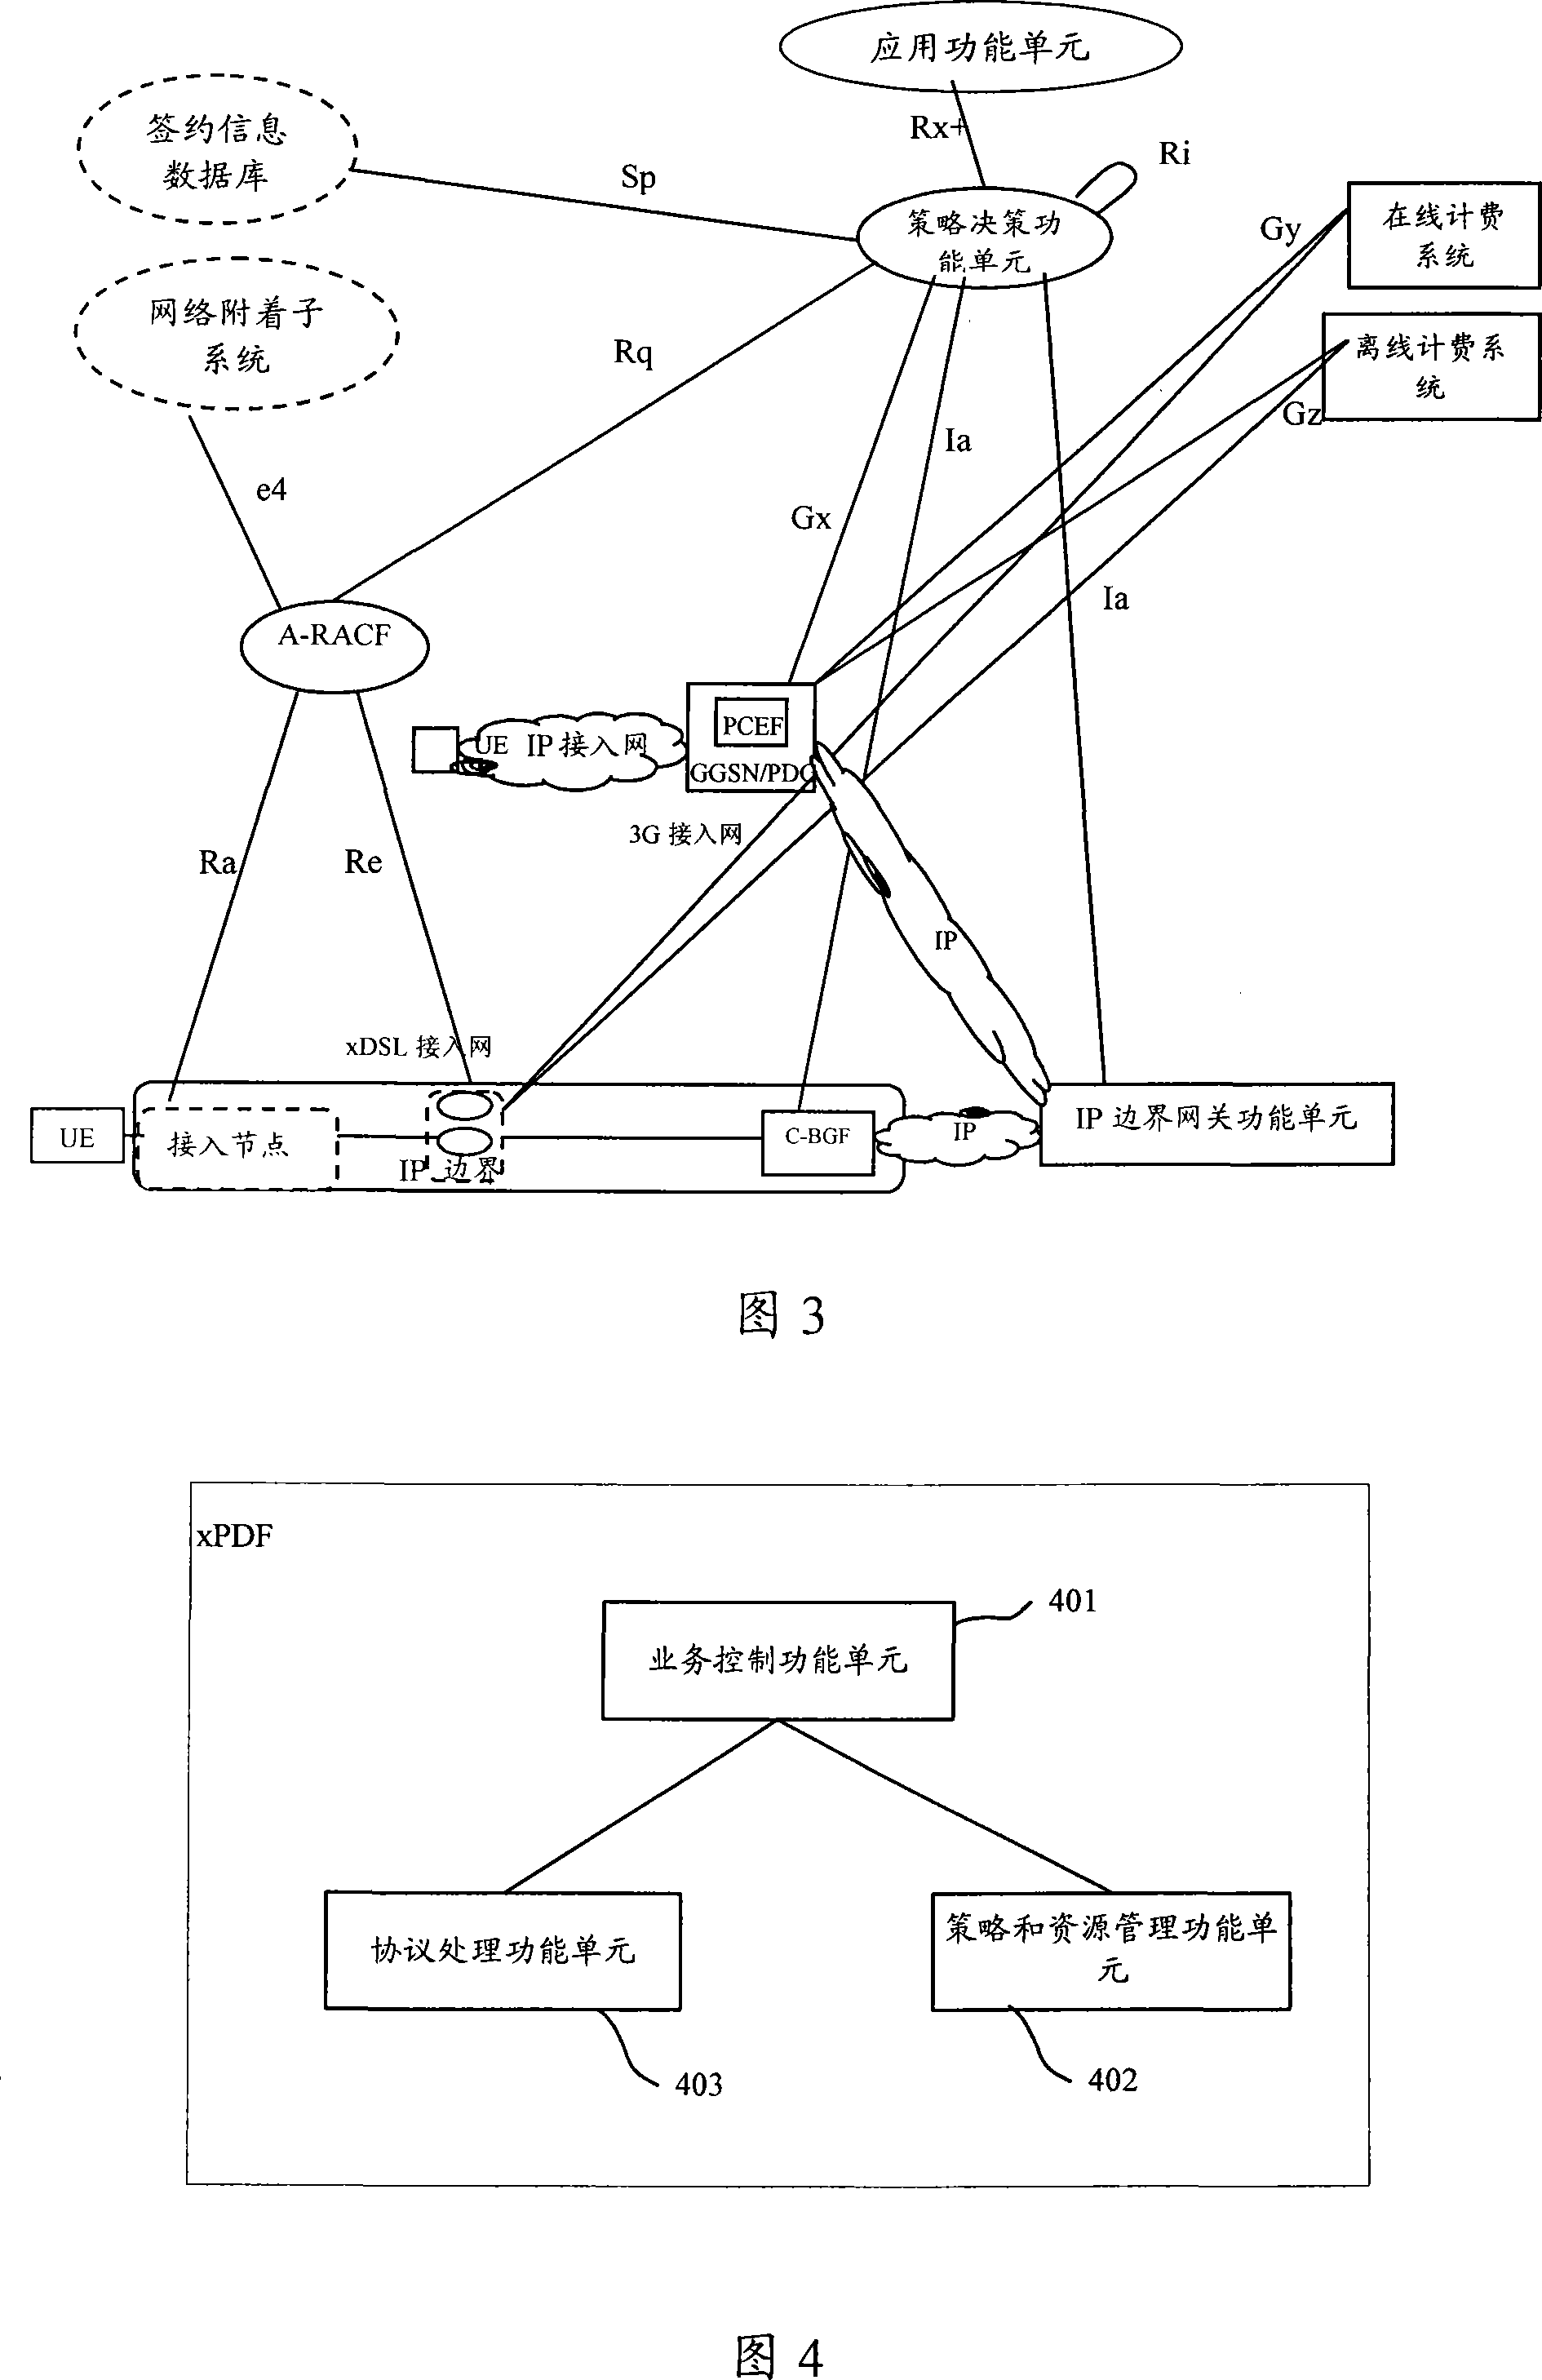 Resource admission control system and method